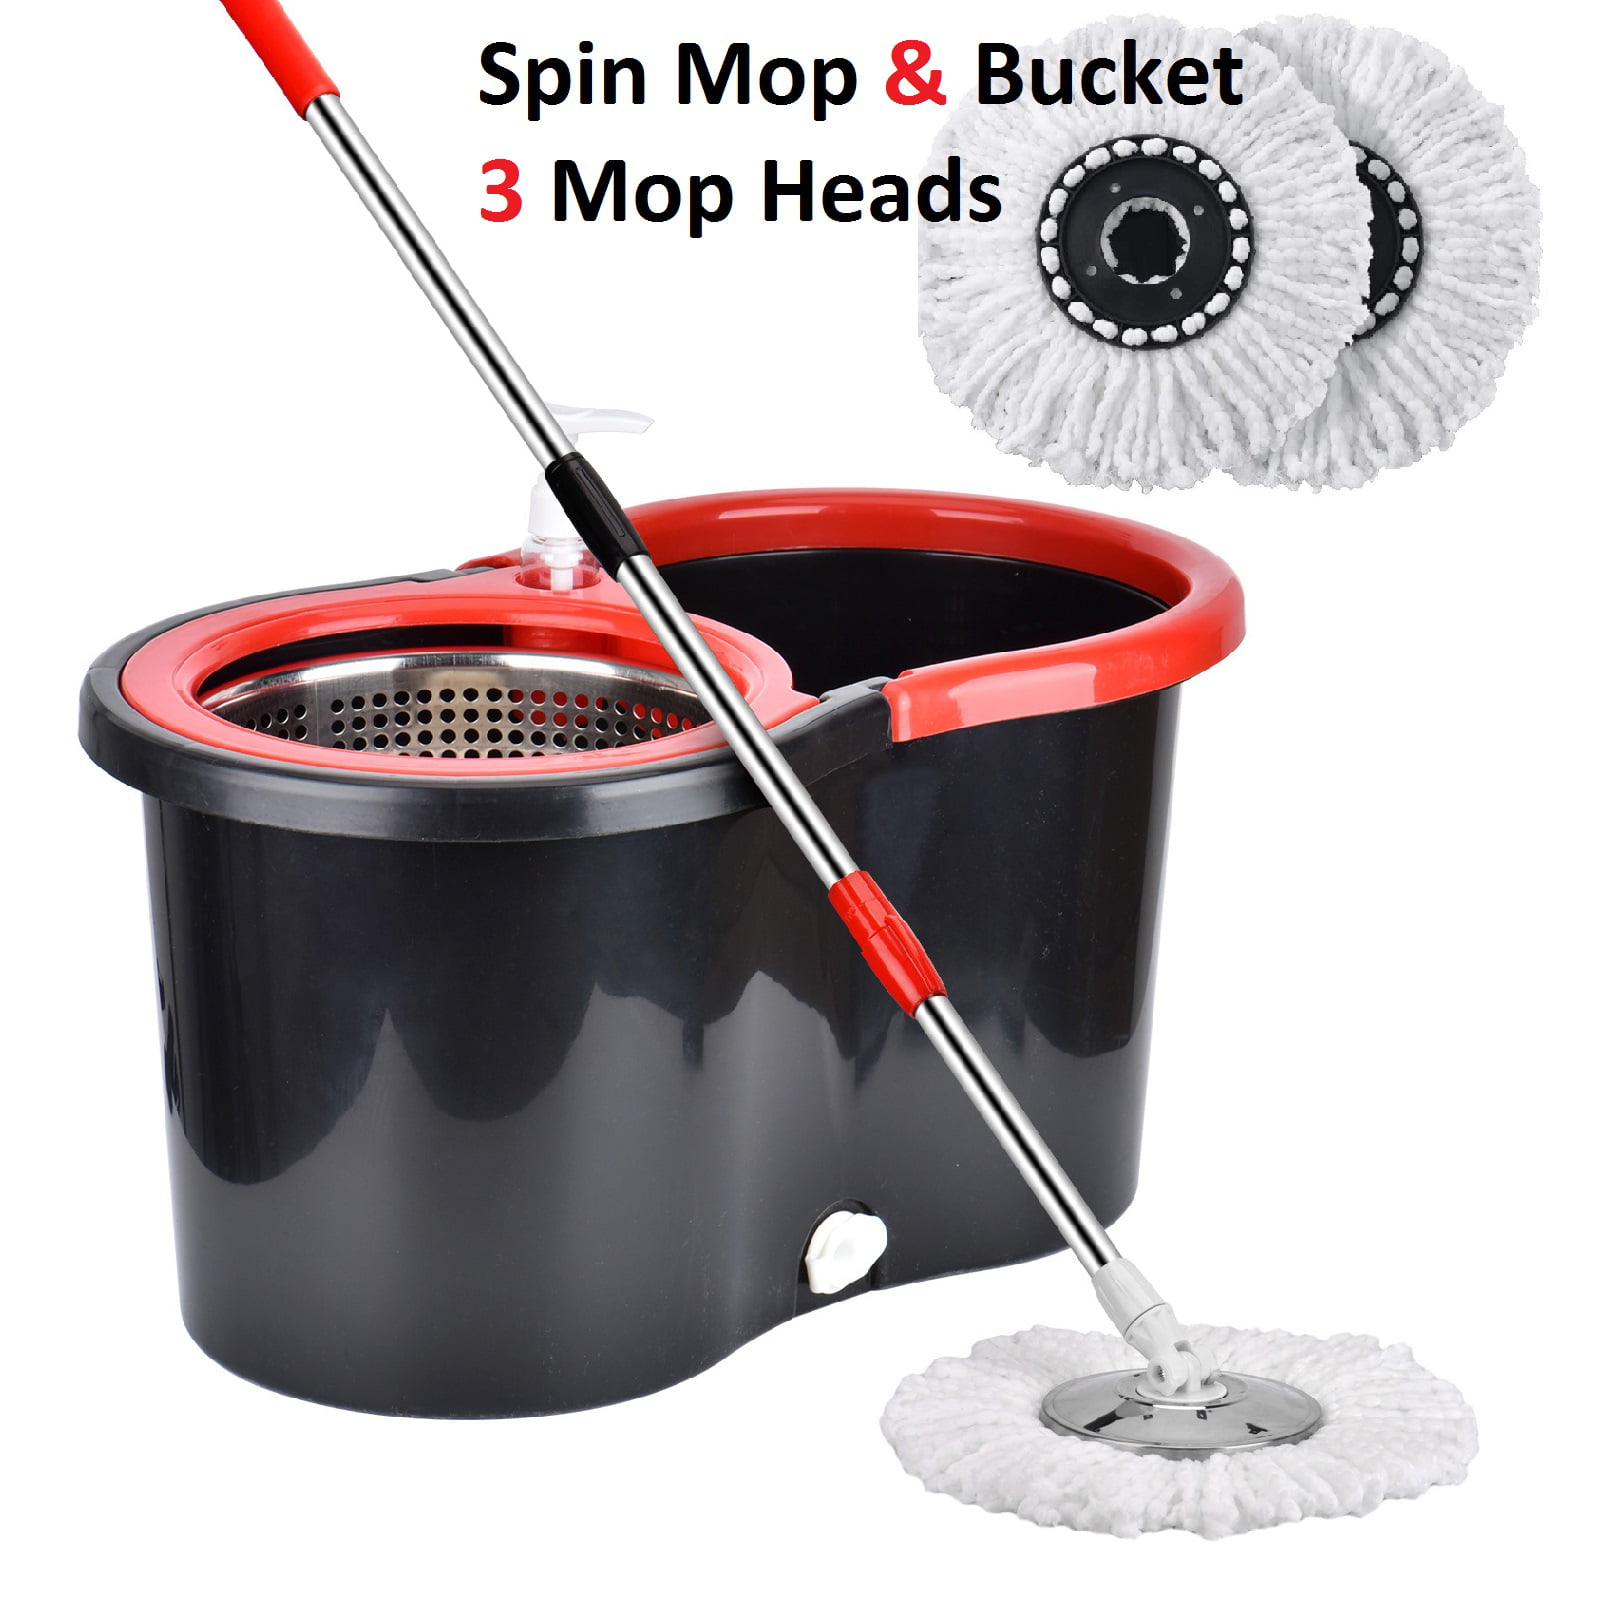 Microfiber Mop Head For 360° Rotating Spin Mop Bucket Dry Wet Cleaning New 